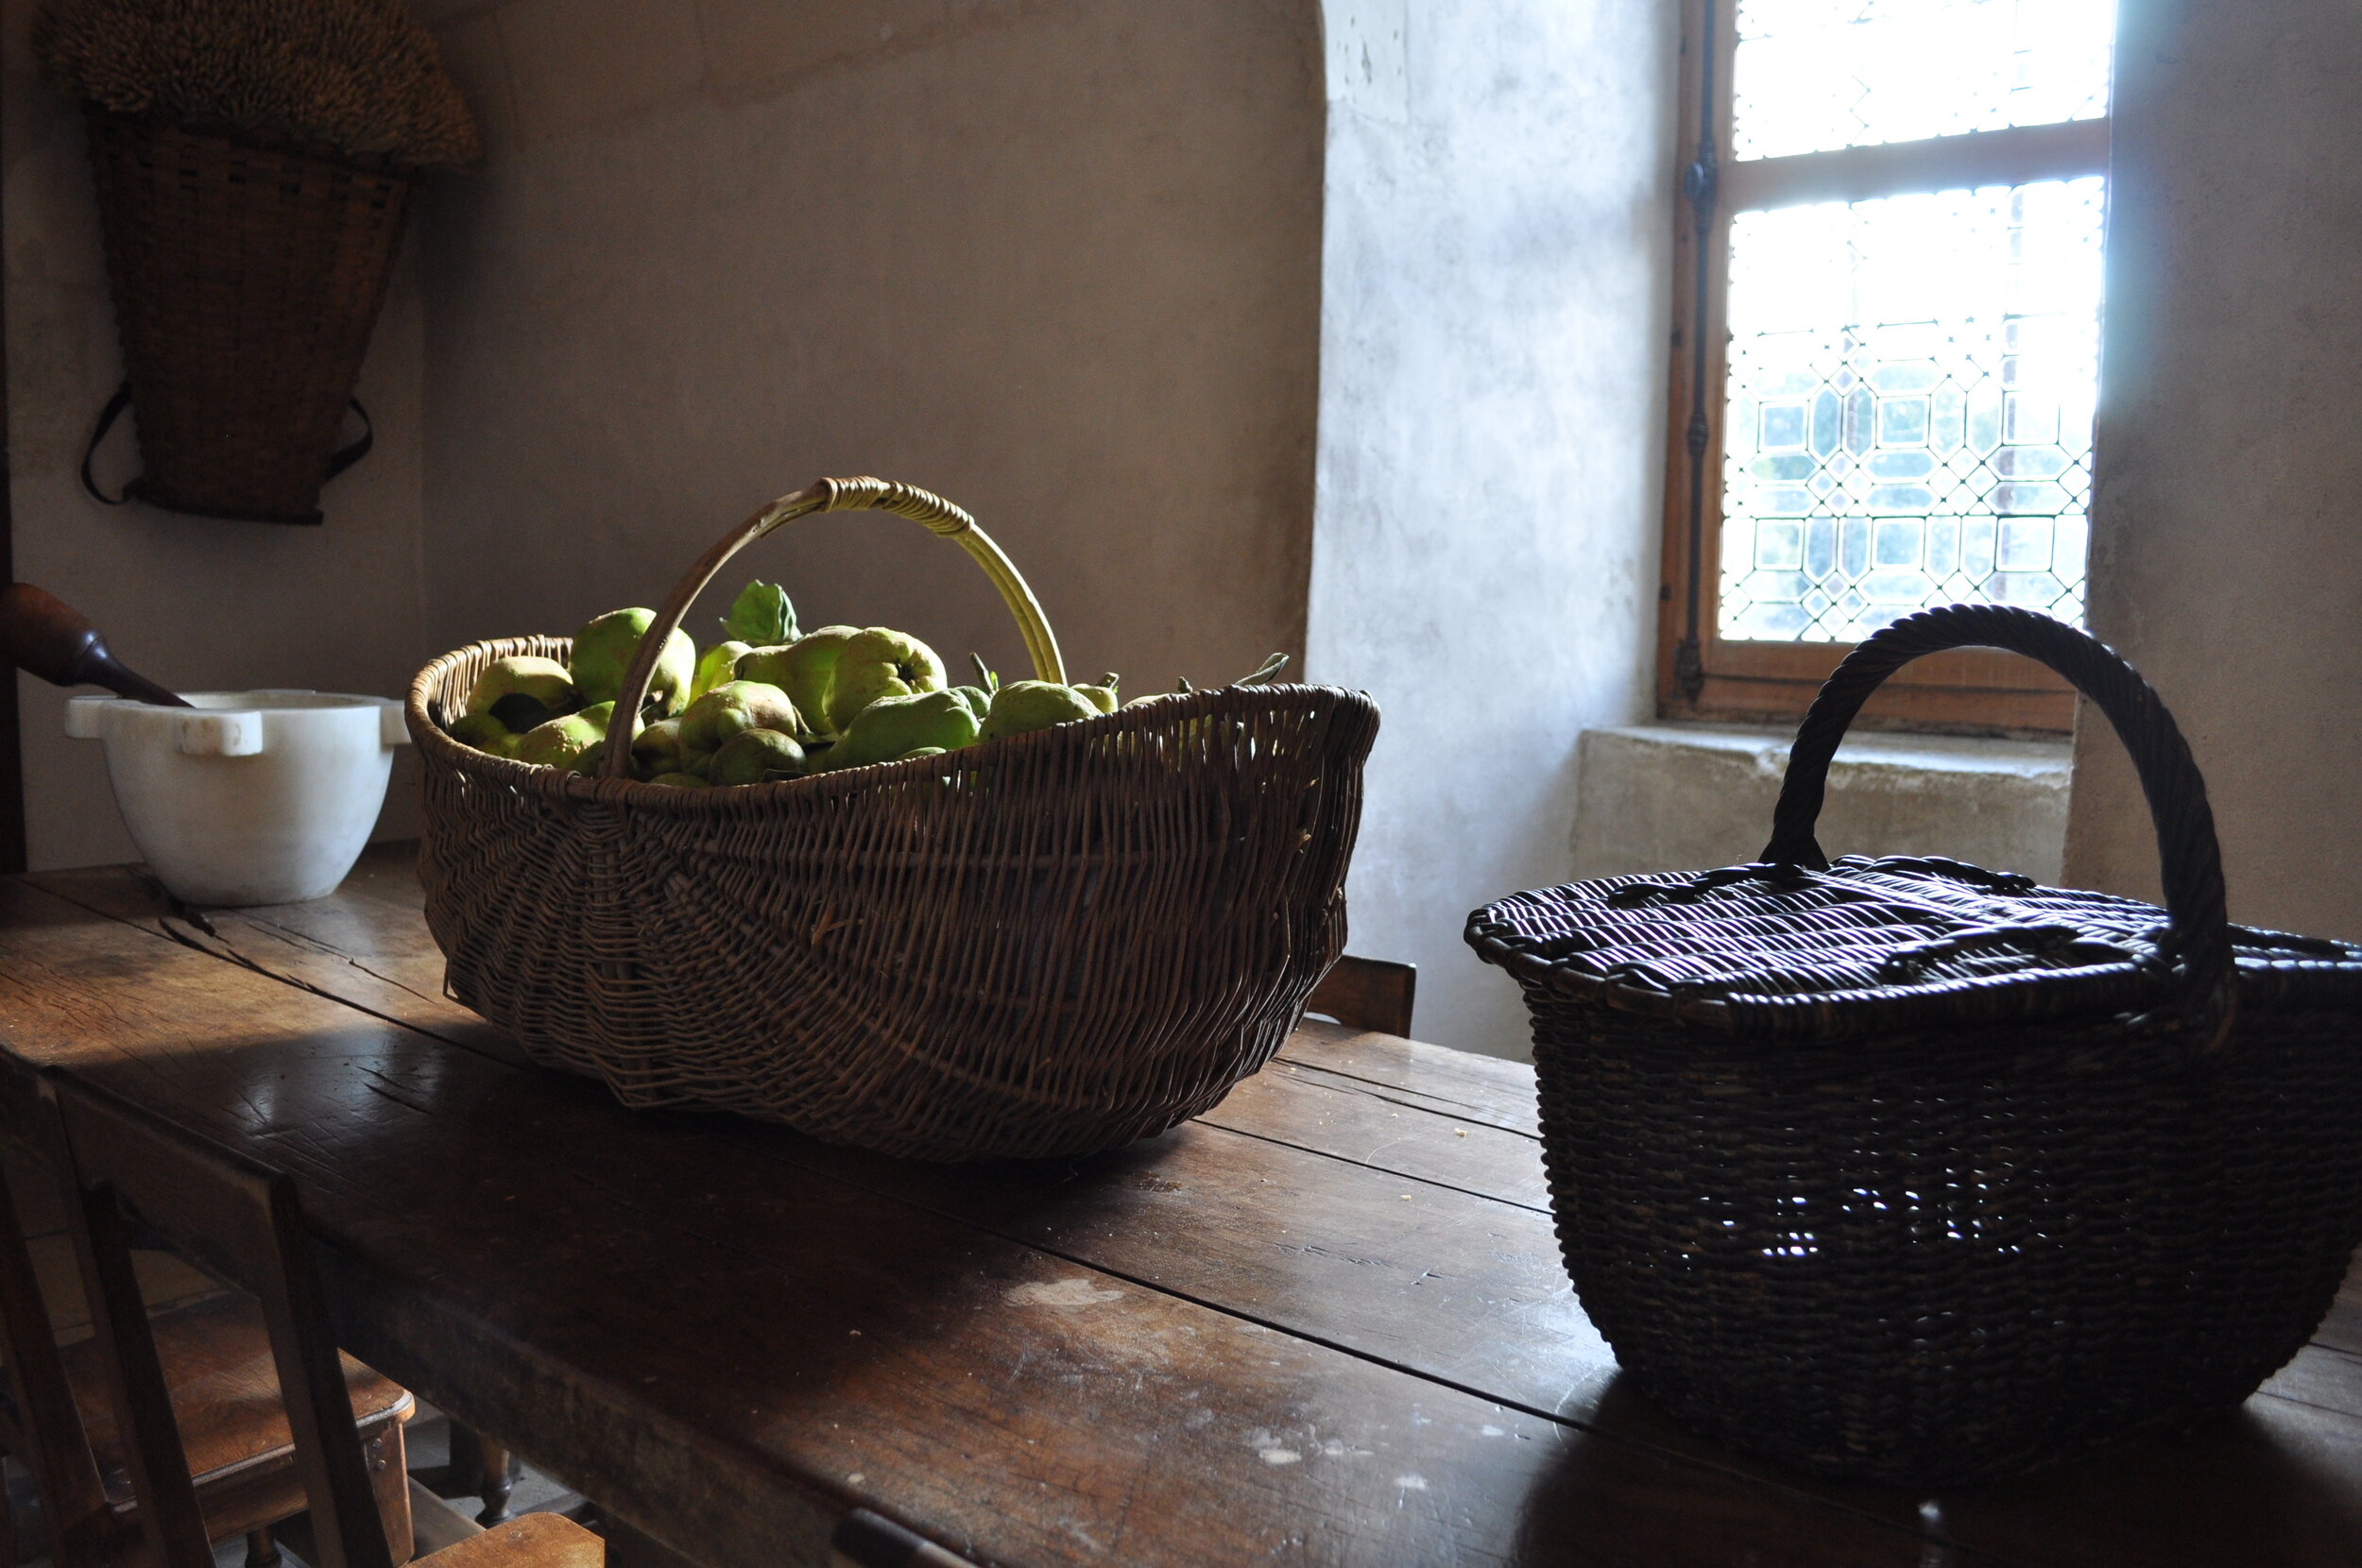 In the larder, produce from Chenonceau’s working gardens and farm